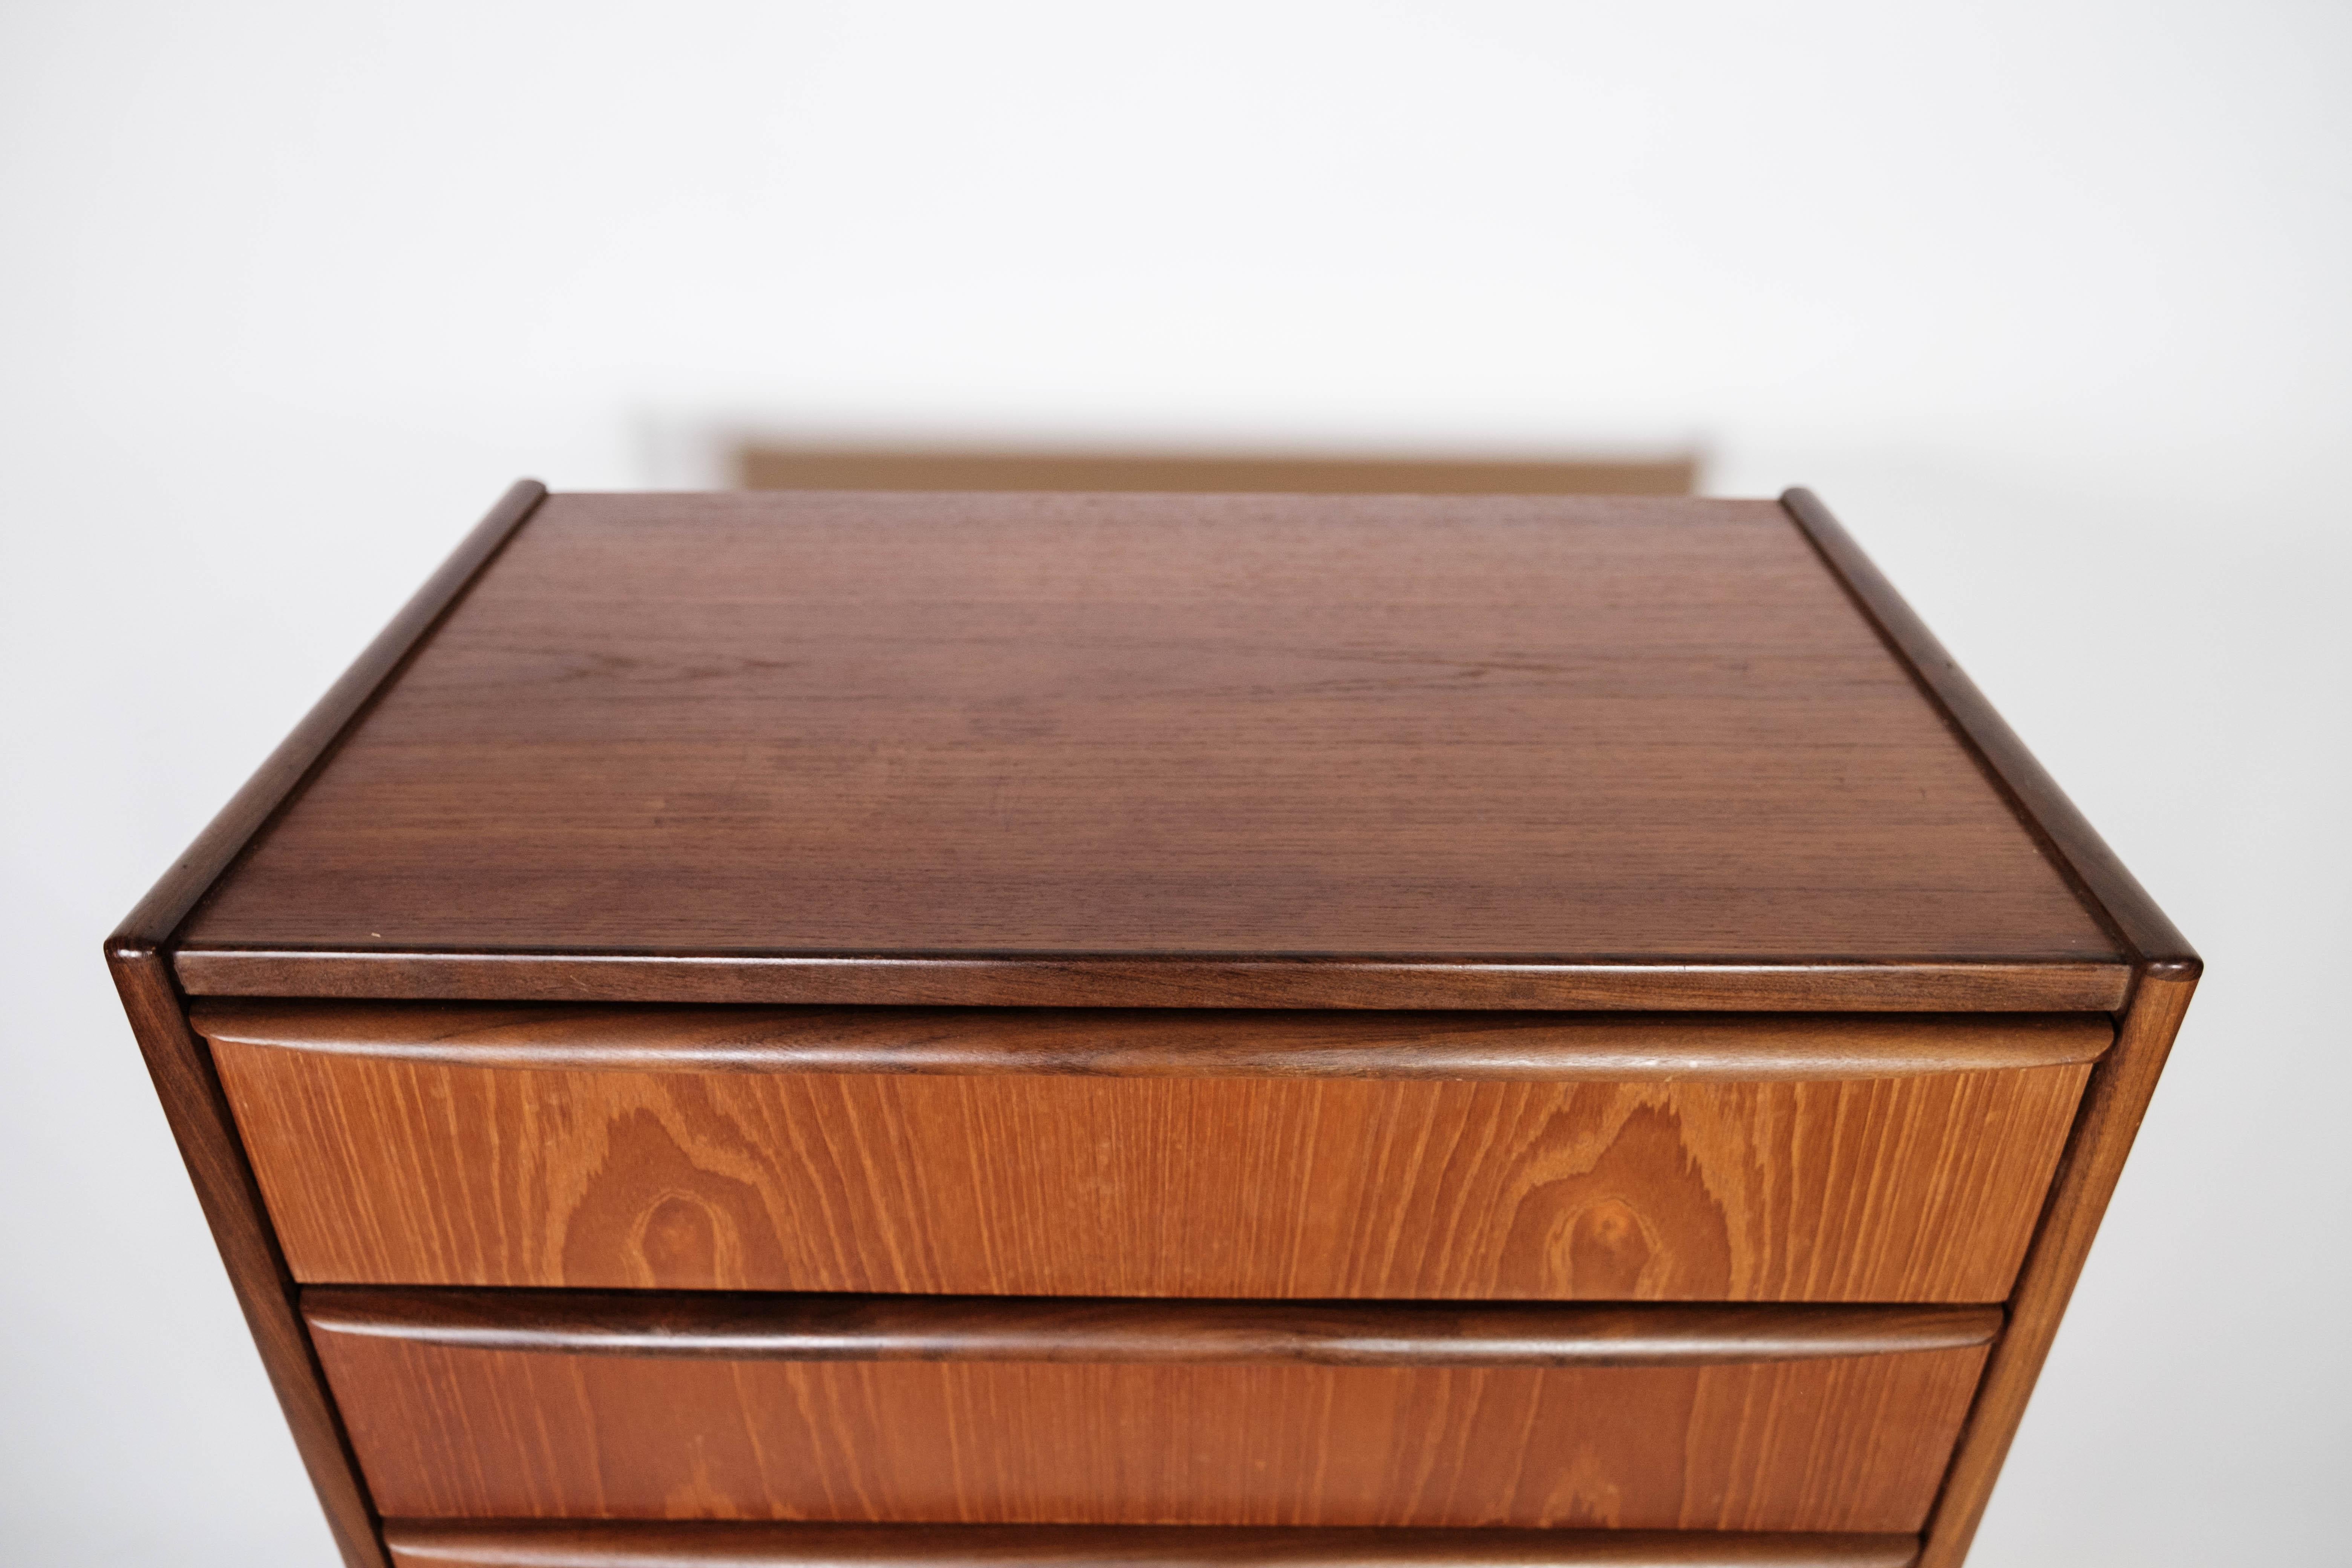 Scandinavian Modern Chest of Drawers in Teak with Six Drawers, of Danish Design from the 1960s